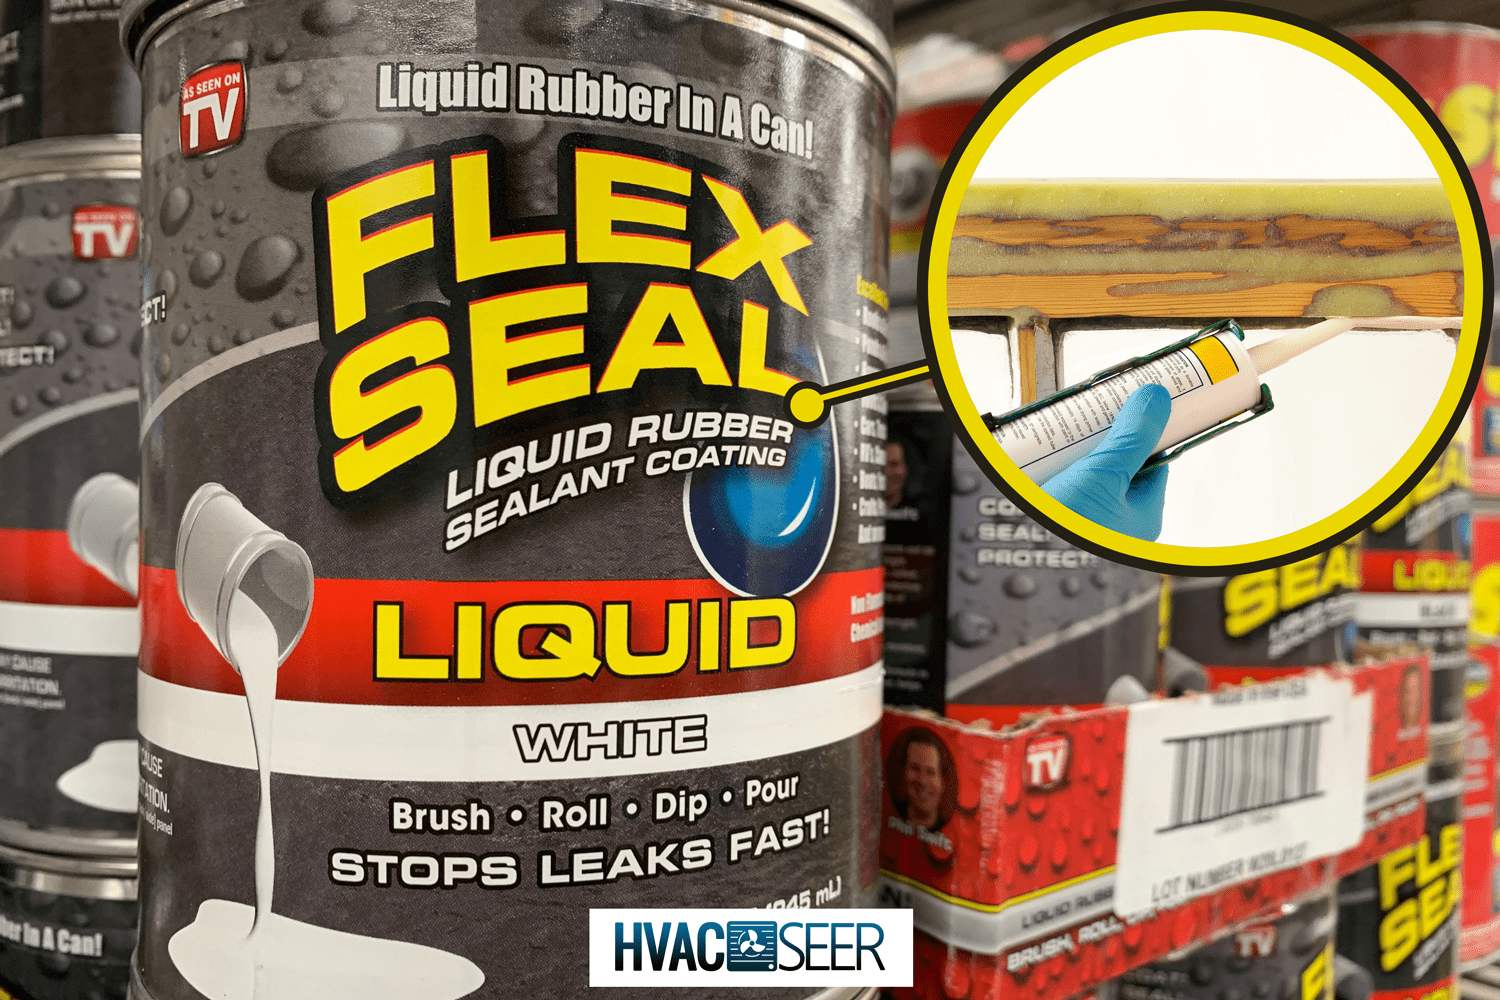 Cans of Flex Seal on a Store Shelf - Does Flex Seal Liquid Work On 